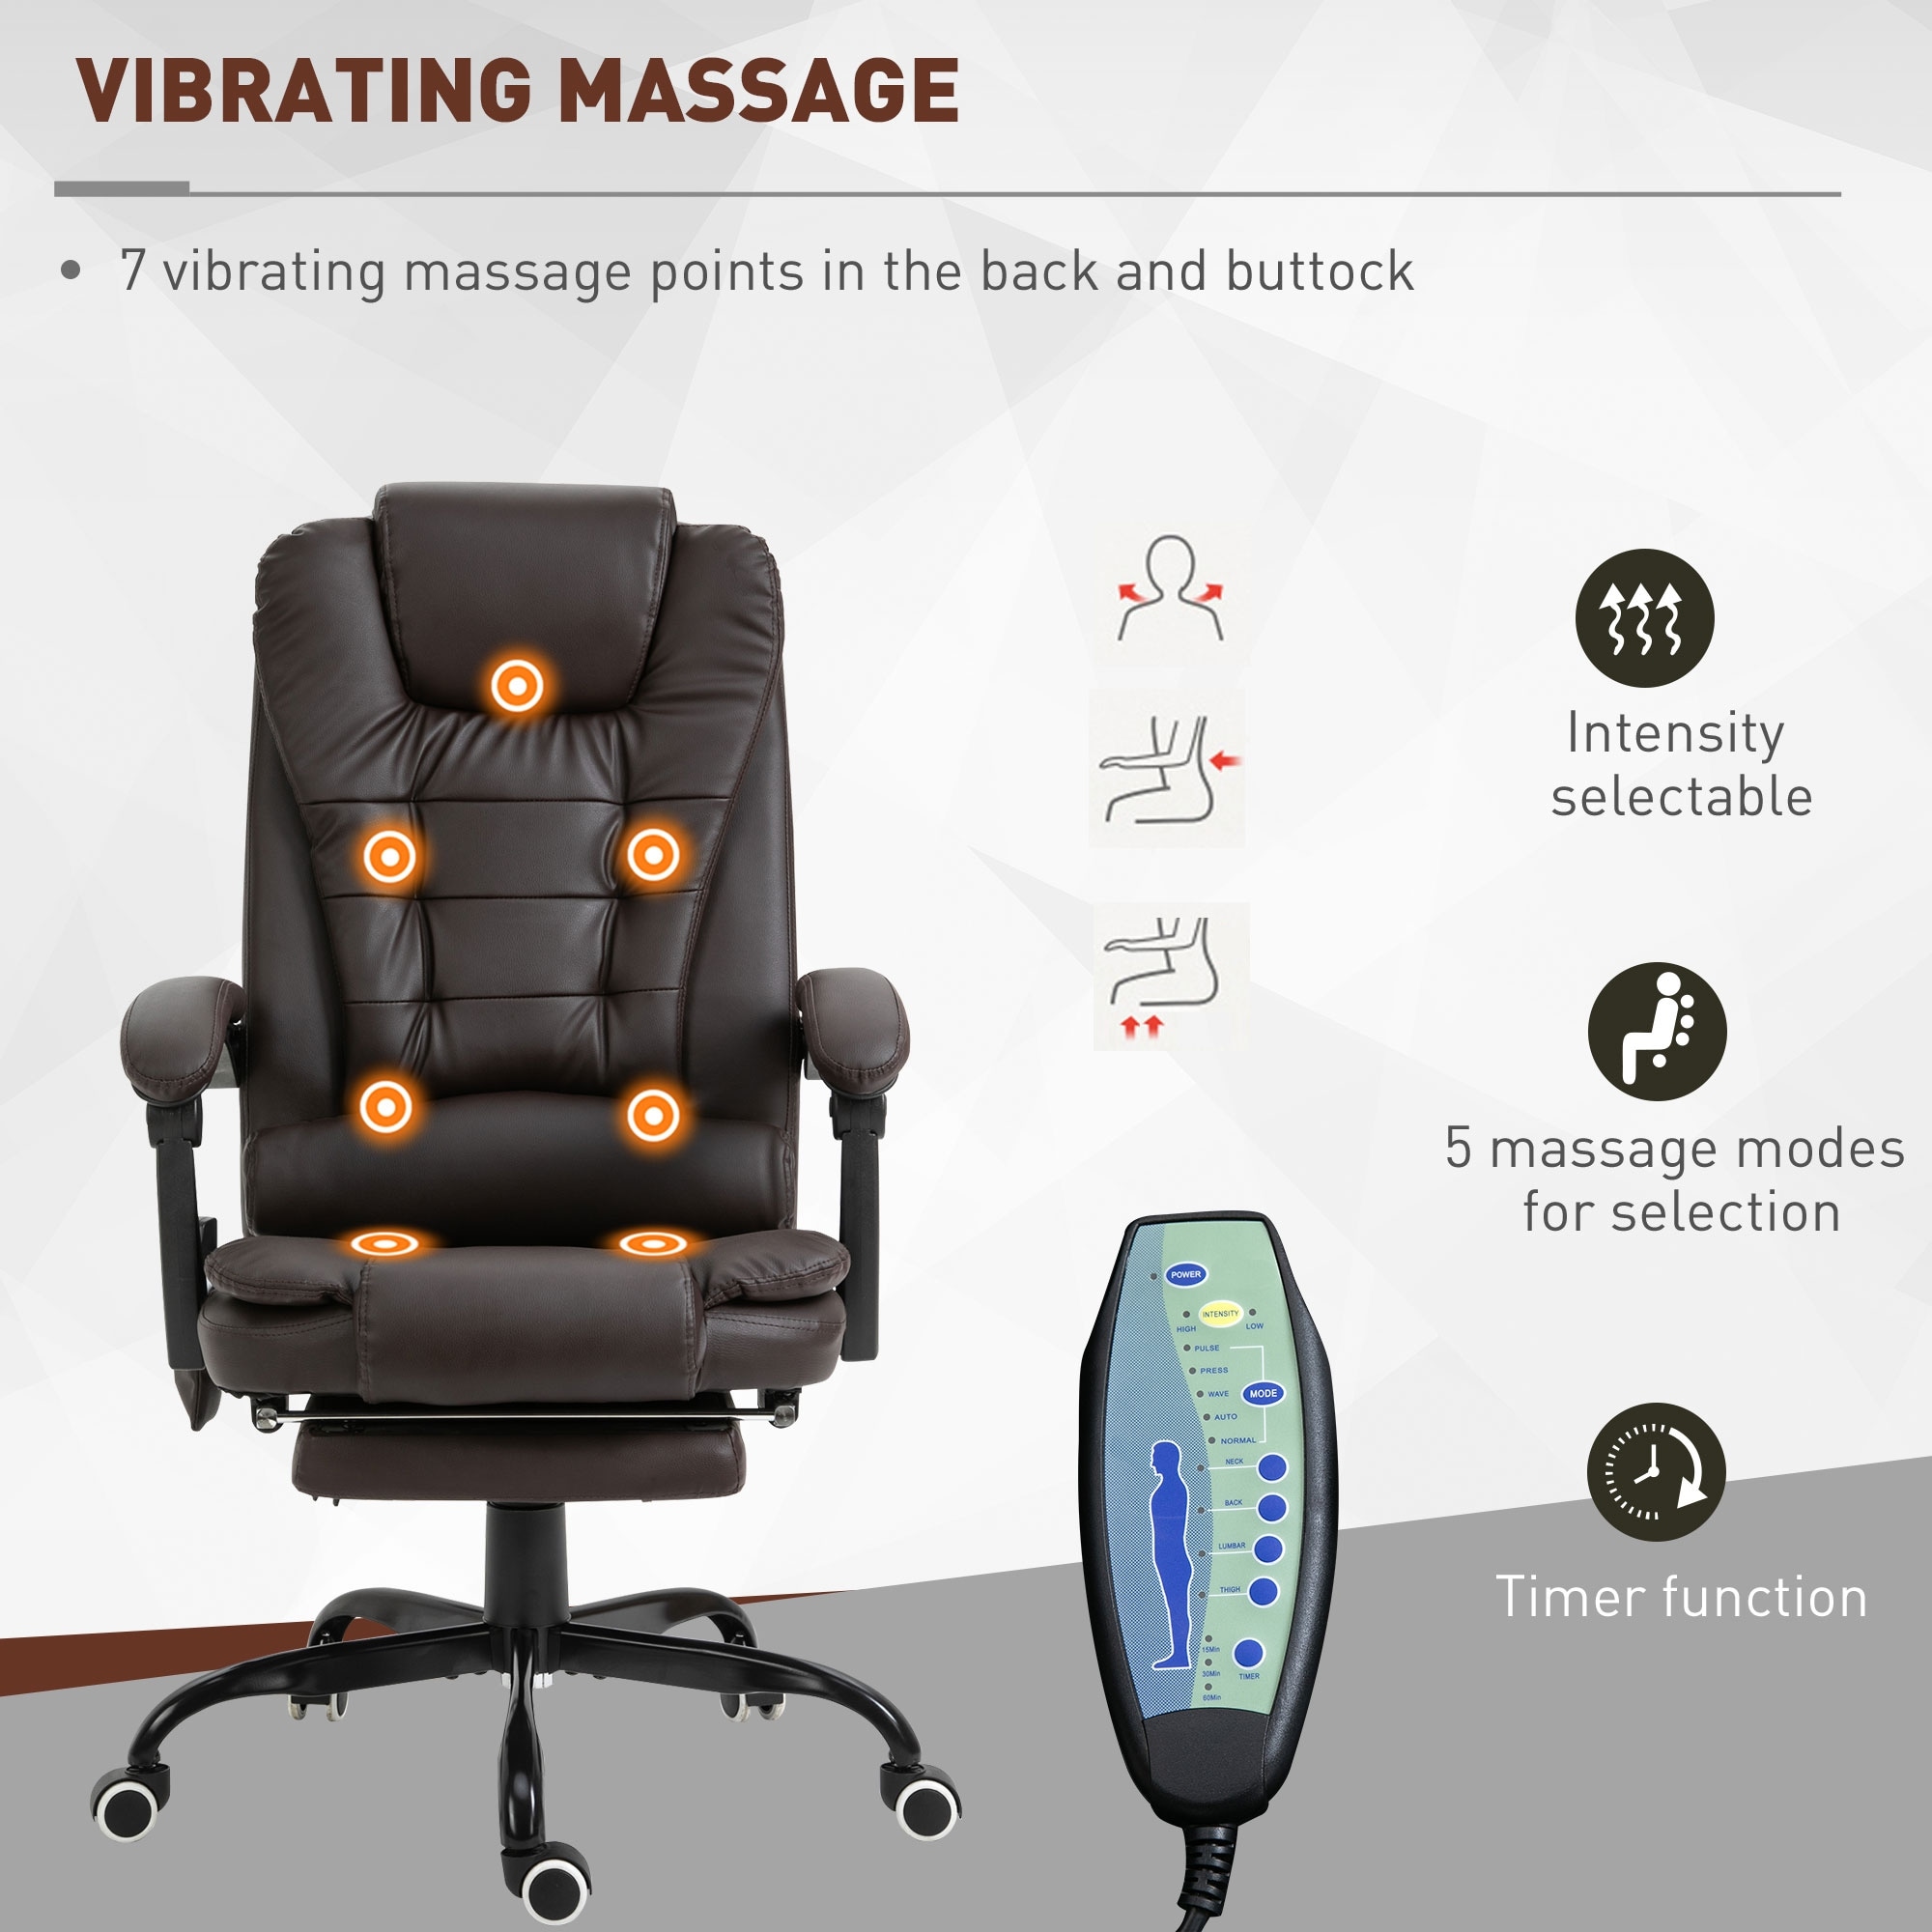 https://ak1.ostkcdn.com/images/products/is/images/direct/9adff1ab33fc6faacd62034887ecbc5c72a52c04/Vinsetto-7-Point-Vibrating-Massage-Office-Chair-High-Back-Executive-Recliner-with-Lumbar-Support%2C-Footrest%2C-Reclining-Back.jpg